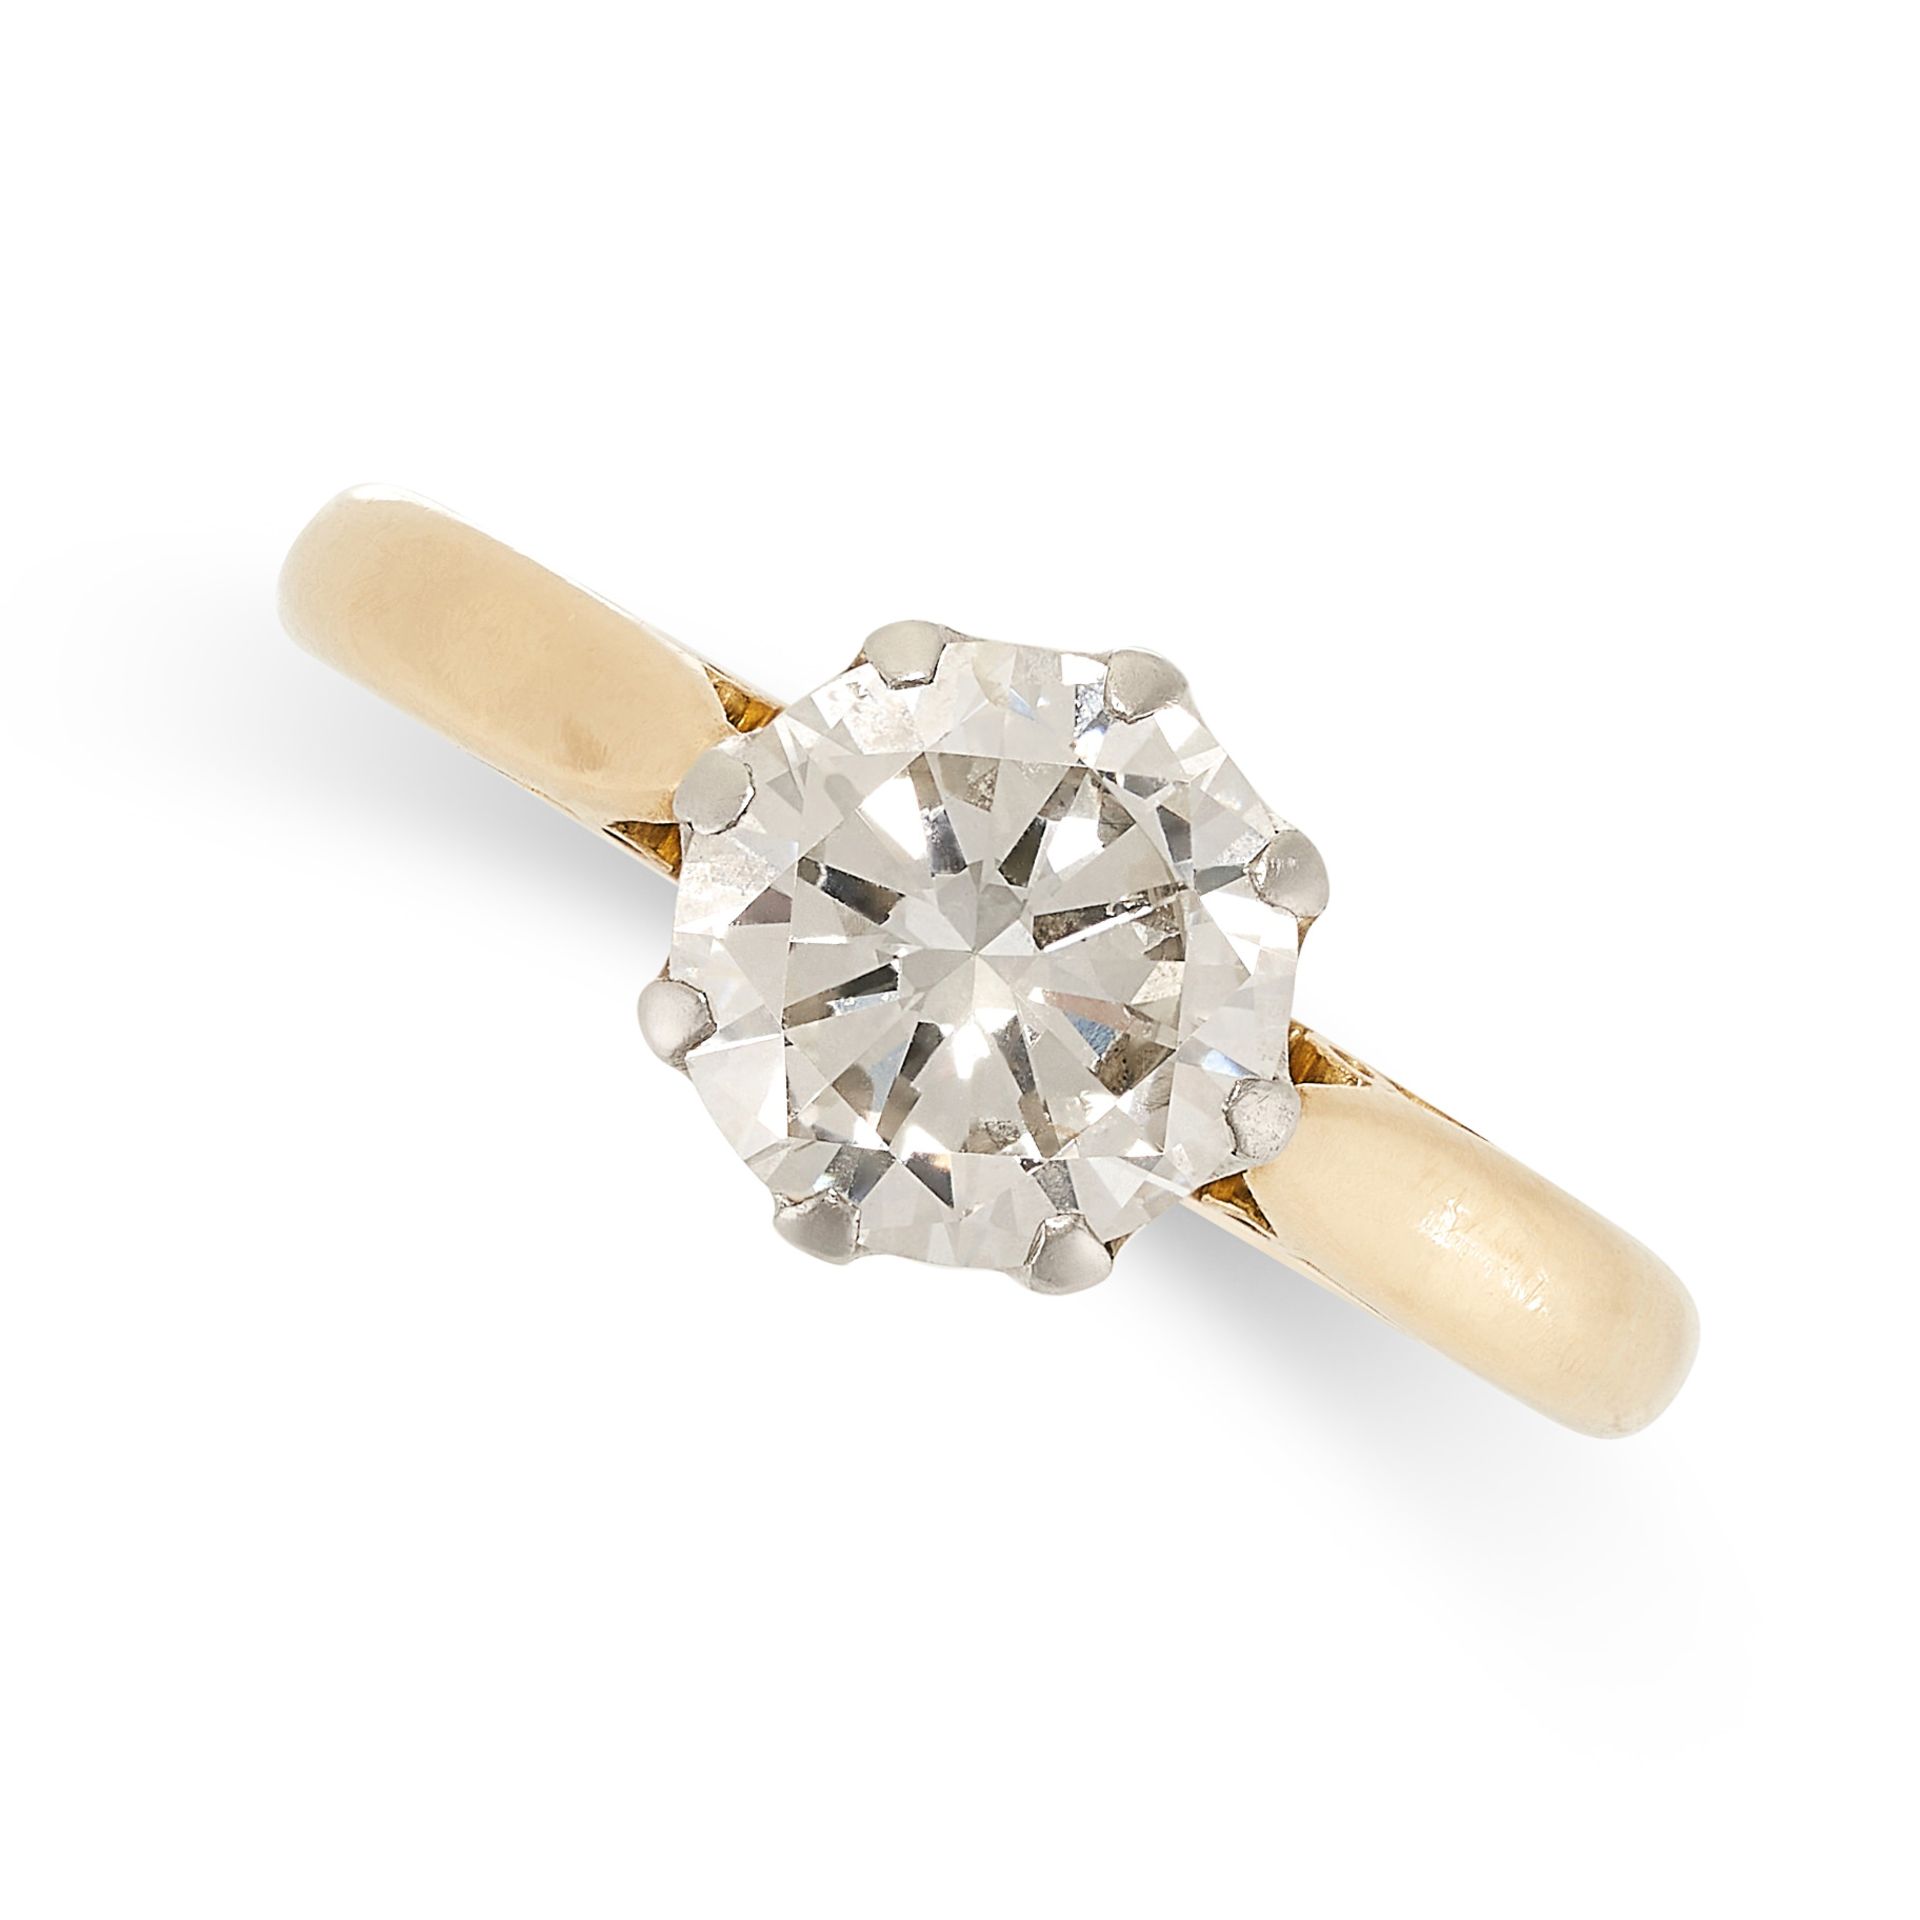 A SOLITAIRE DIAMOND ENGAGEMENT RING in 18ct yellow gold, set with a round brilliant cut diamond of